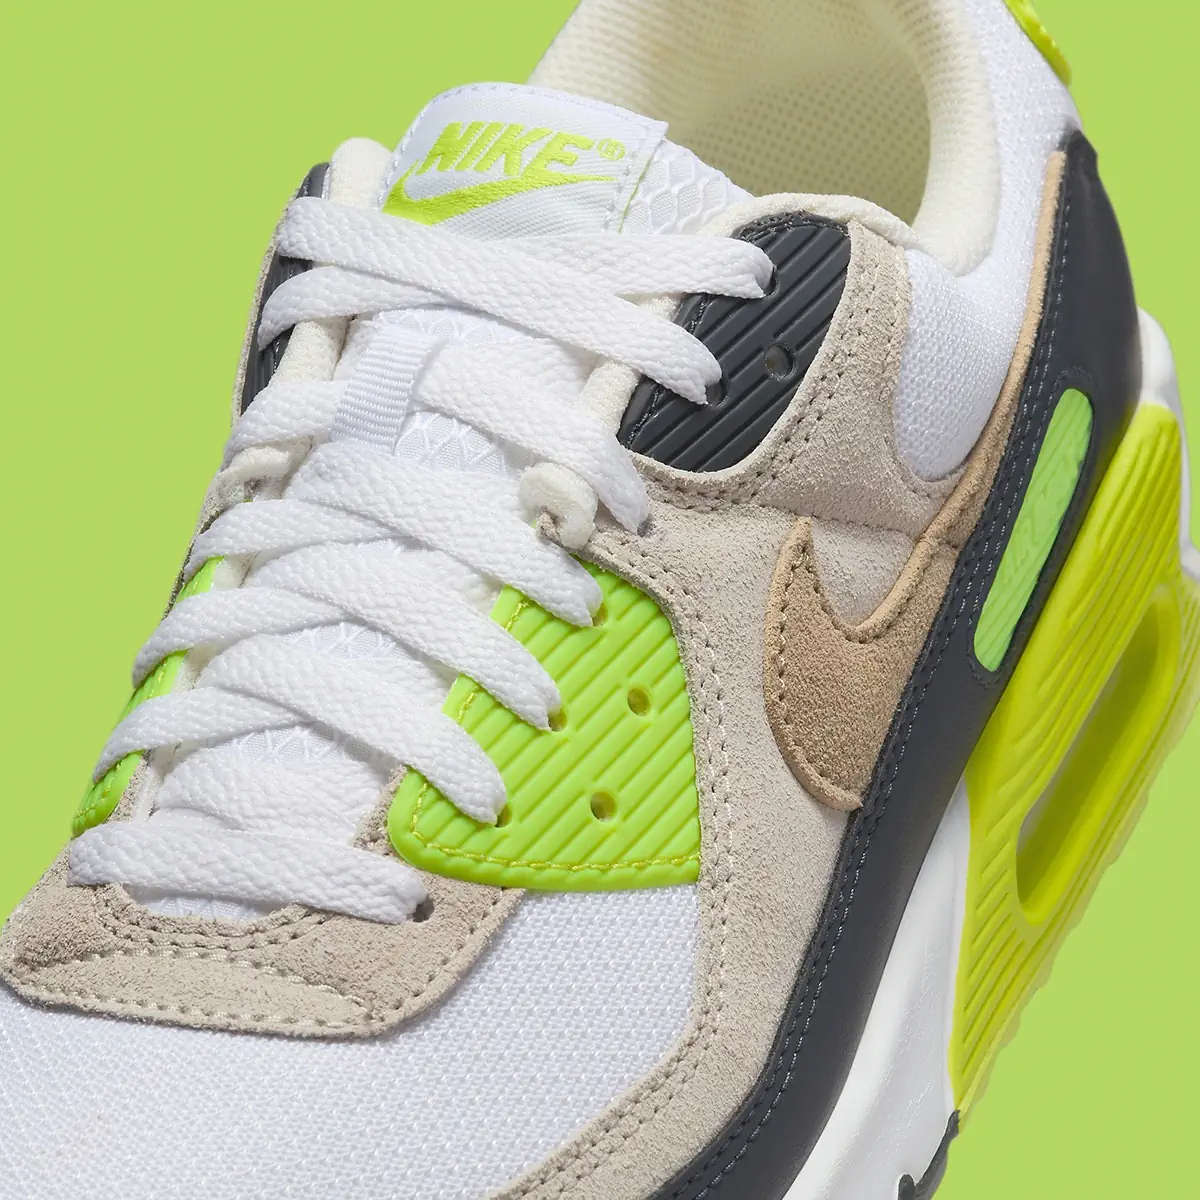 Nike Air Max 90 "Cyber Yellow & Light Orewood Brown" release date summer 2024